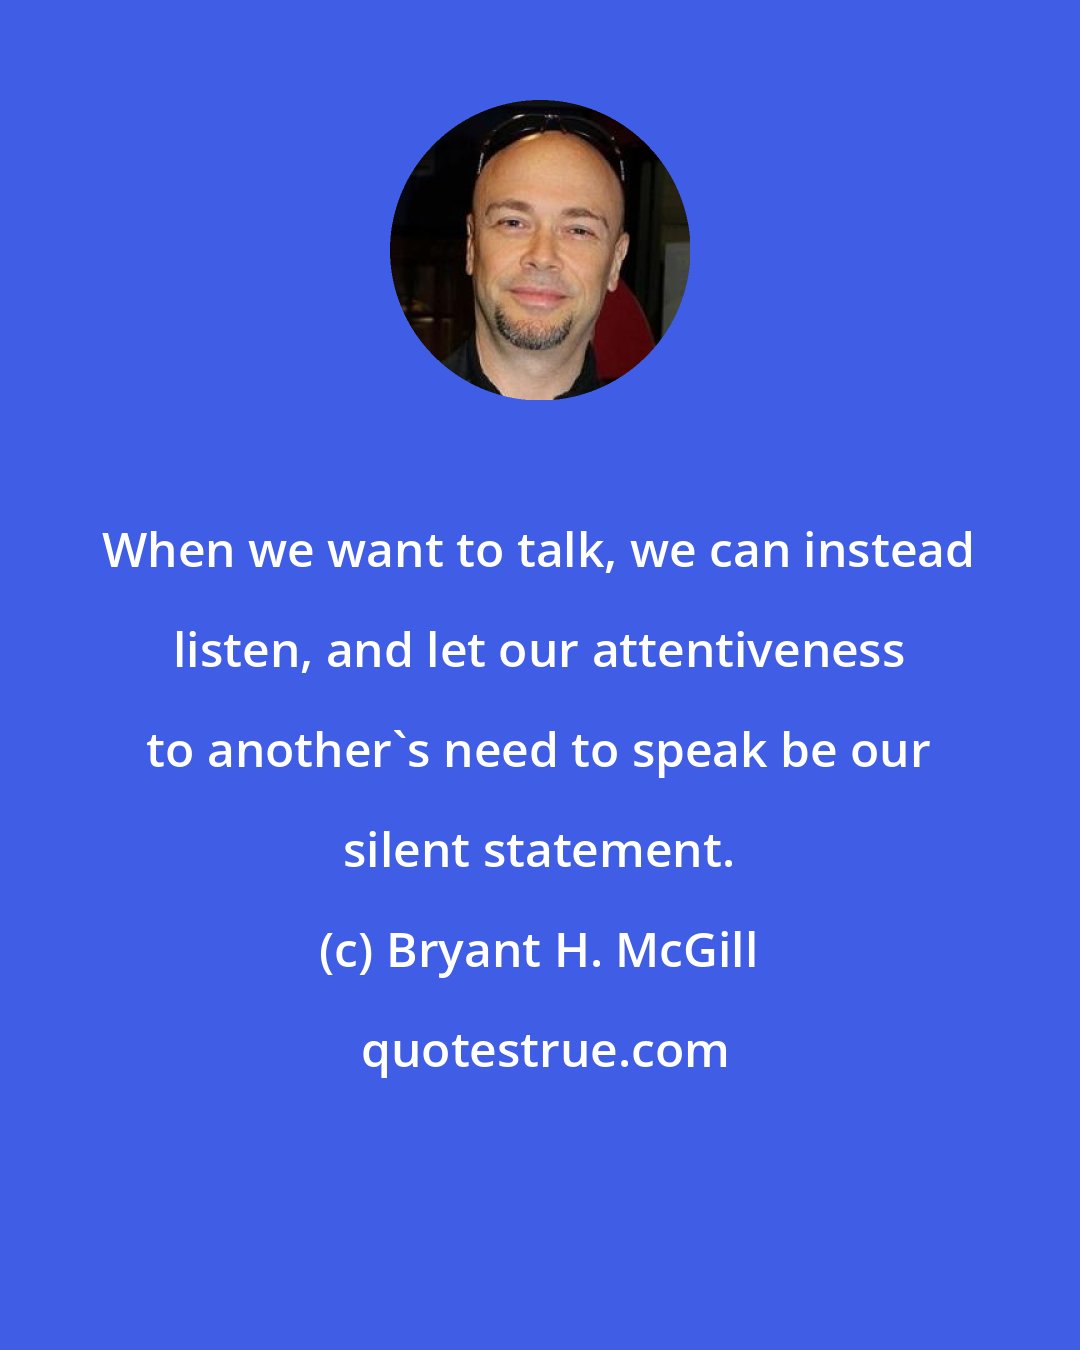 Bryant H. McGill: When we want to talk, we can instead listen, and let our attentiveness to another's need to speak be our silent statement.